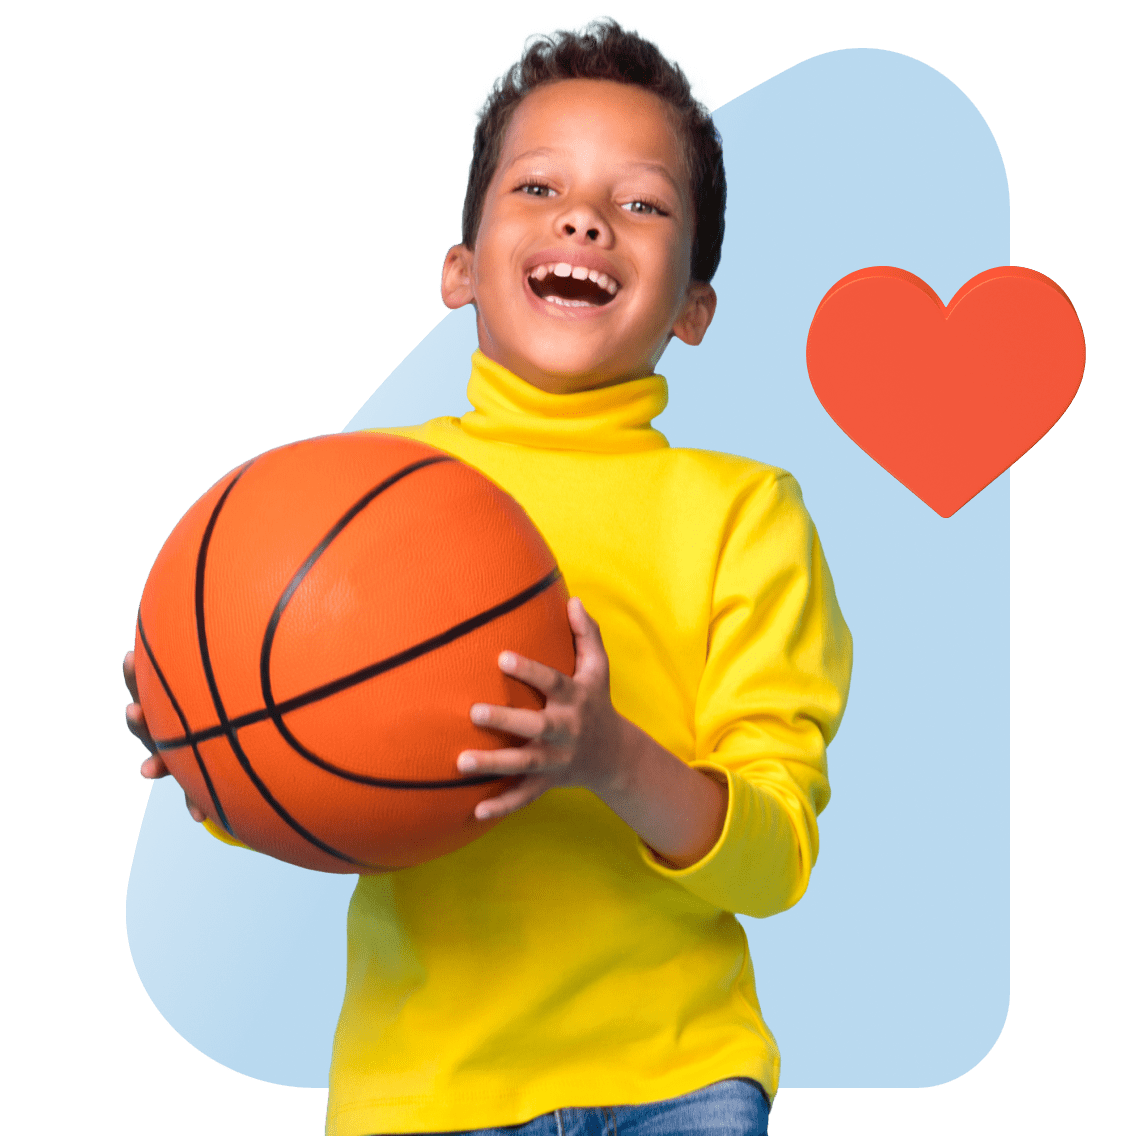 Health and Human Services Education Career Pathway image 1 (name 2 Young Boy Basketball Heart)